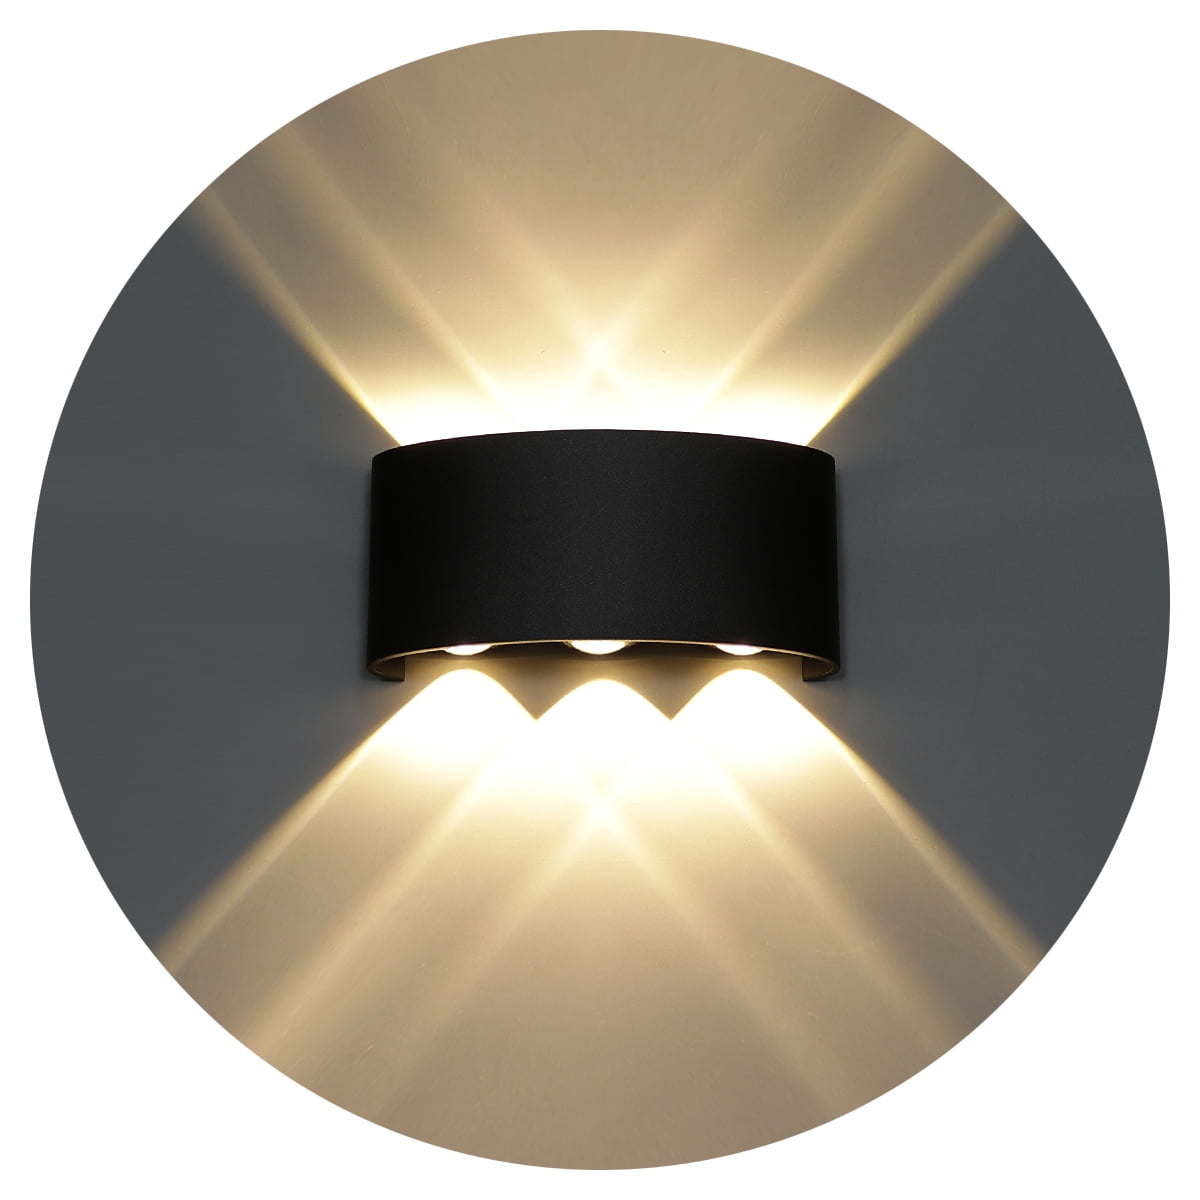 LED Wall Lamp Up Down Lighting Wall Light Sconce Hotel Bedroom Decor Outdoor 